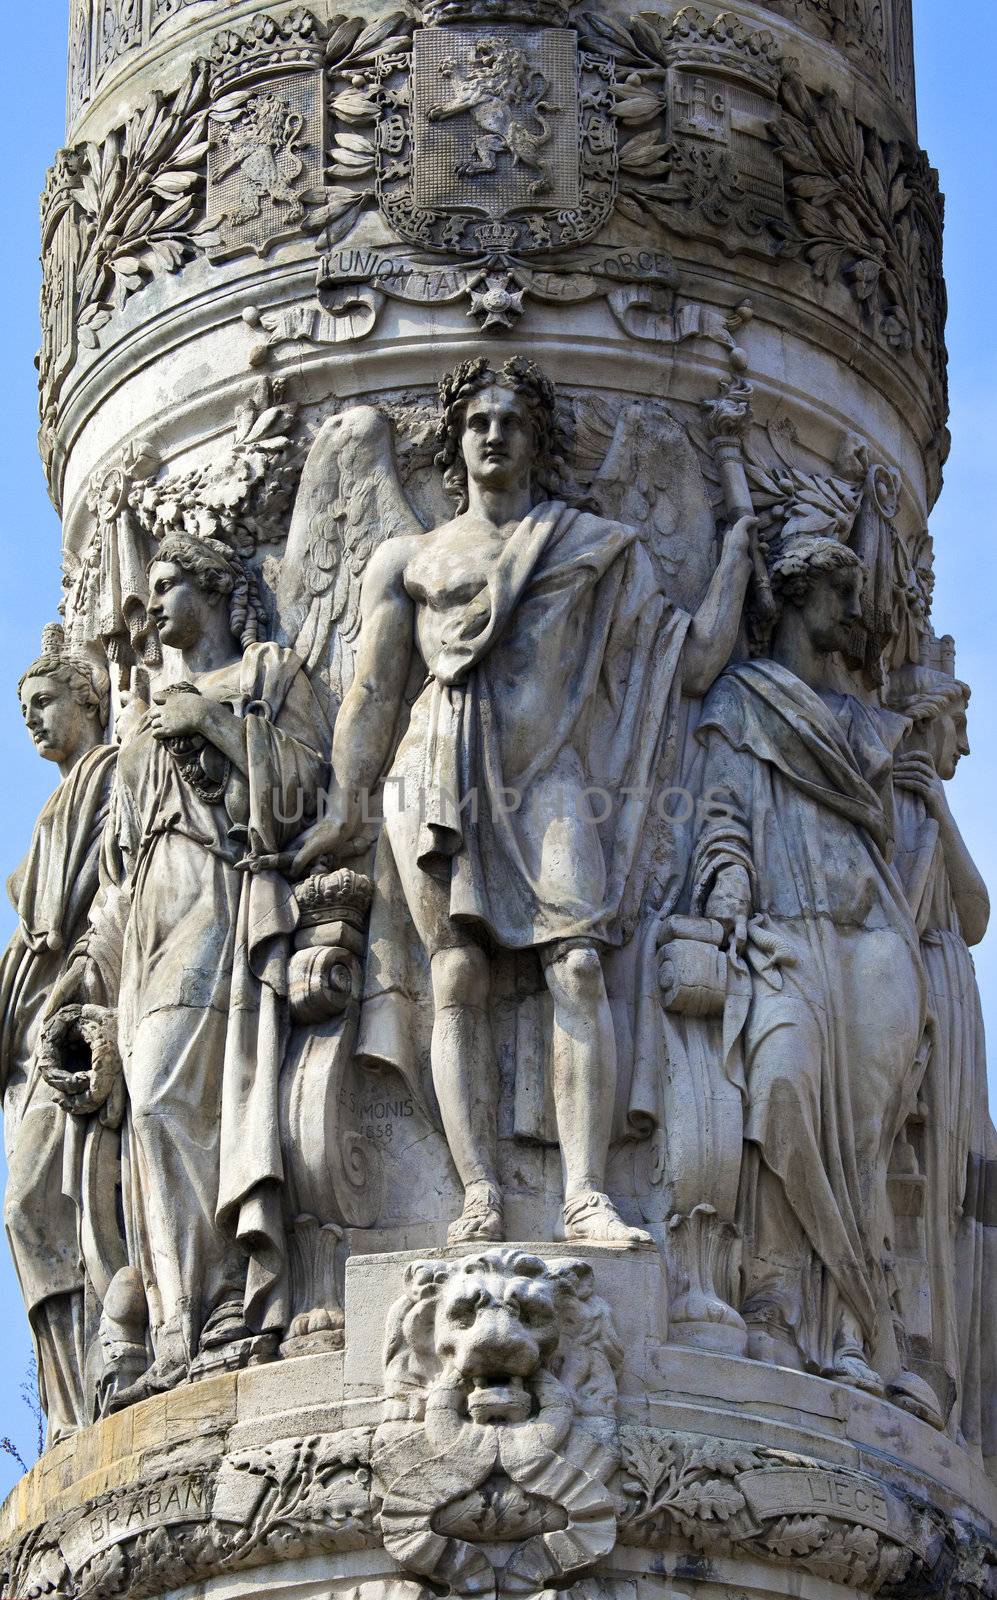 Close-up Details on the Congress Column in Brussels, Belgium.